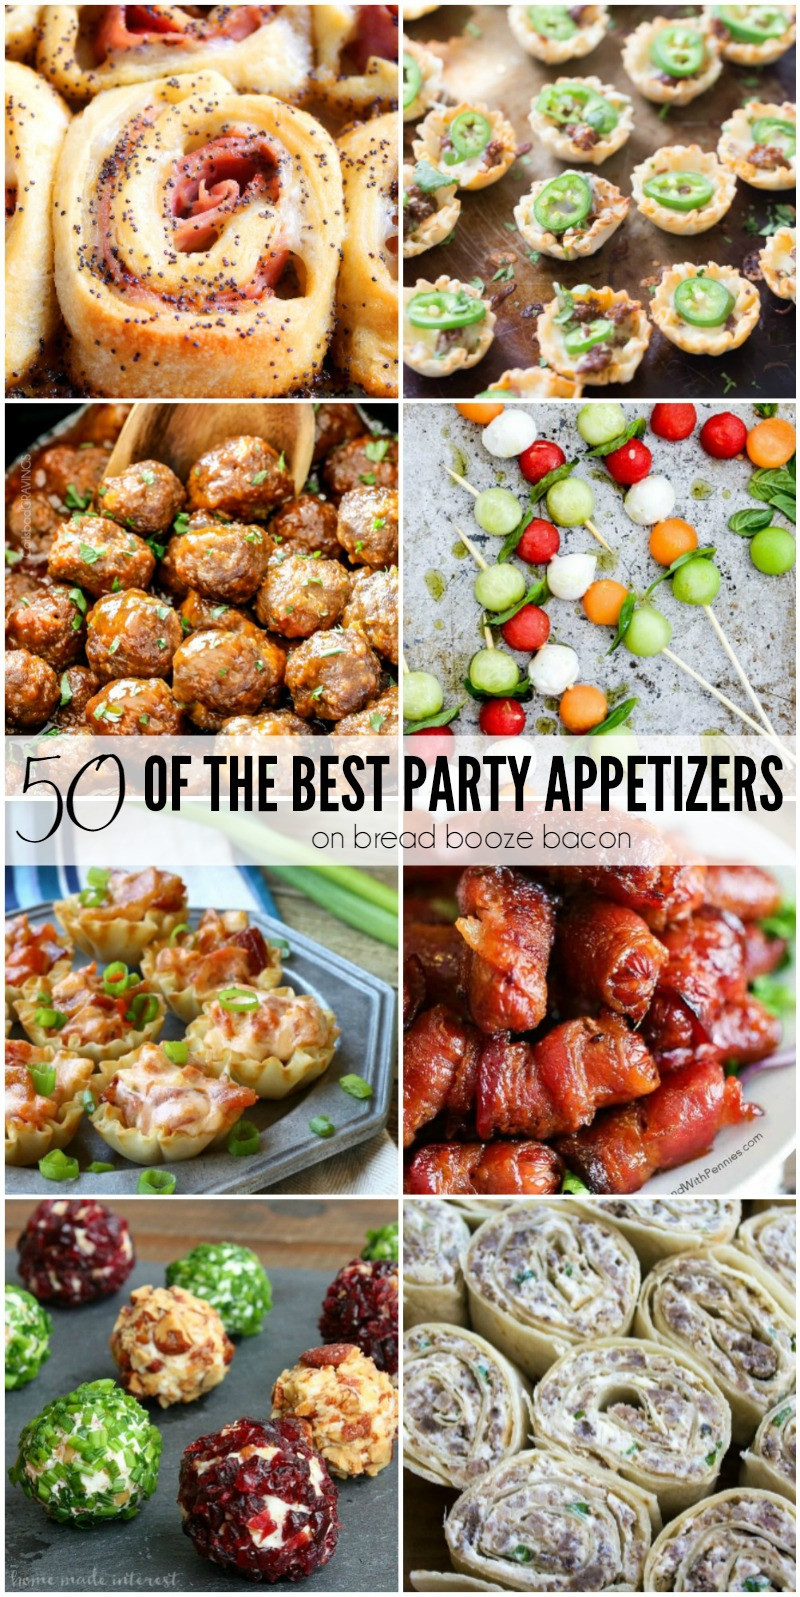 Great Holiday Party Food Ideas
 50 of the Best Party Appetizers • Bread Booze Bacon